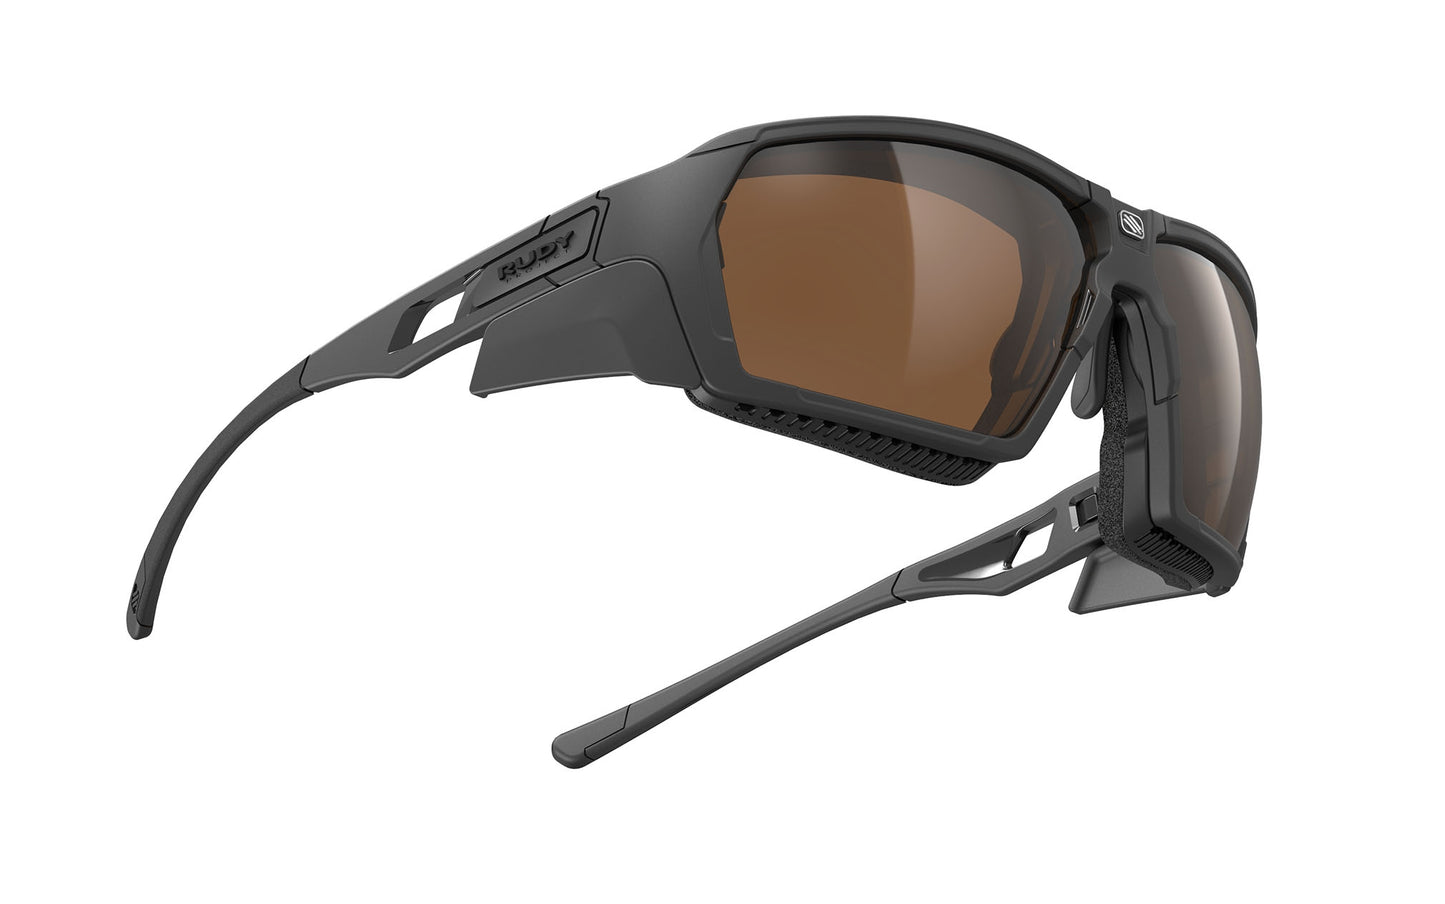 Load image into Gallery viewer, Rudy Project Agent Q Black Matte Rp Optics Hi Altitude+ Elastic Strap And Shield Interface+ Multilaser Gold+ Trasparent Lenses Sunglasses
